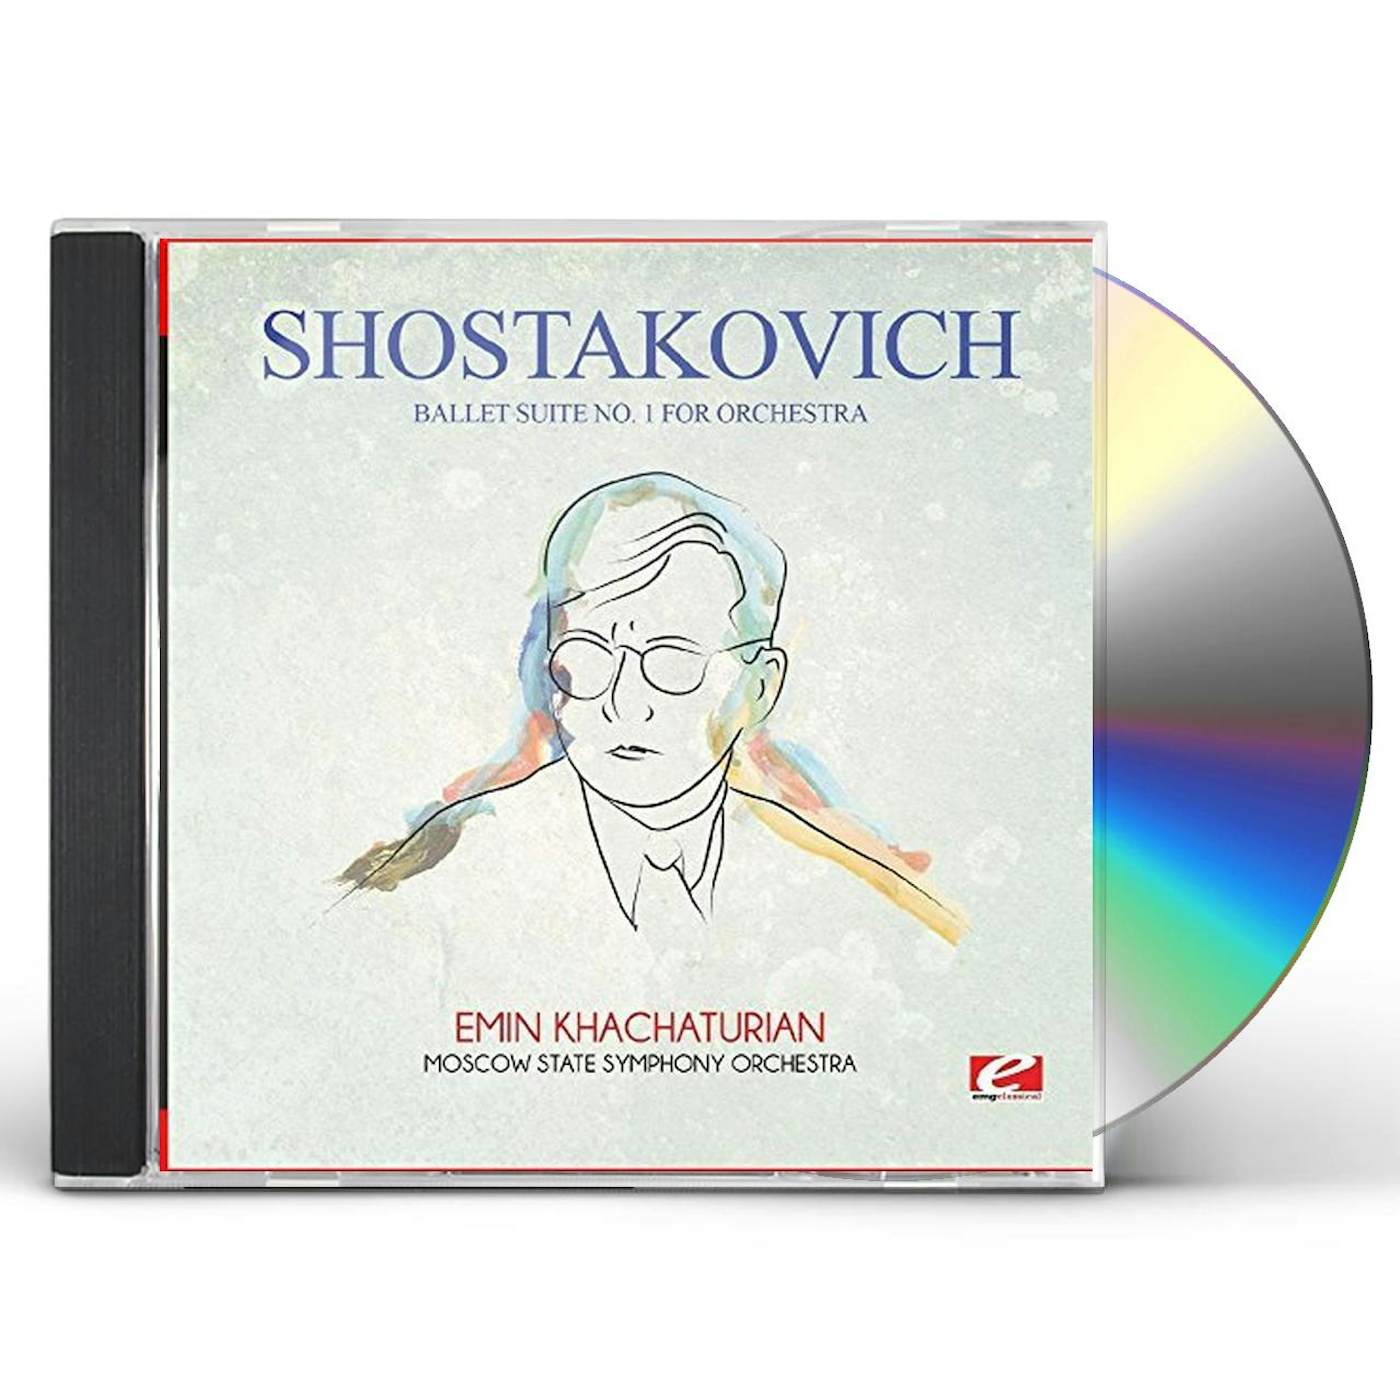 Shostakovich BALLET SUITE NO. 1 FOR ORCHESTRA CD